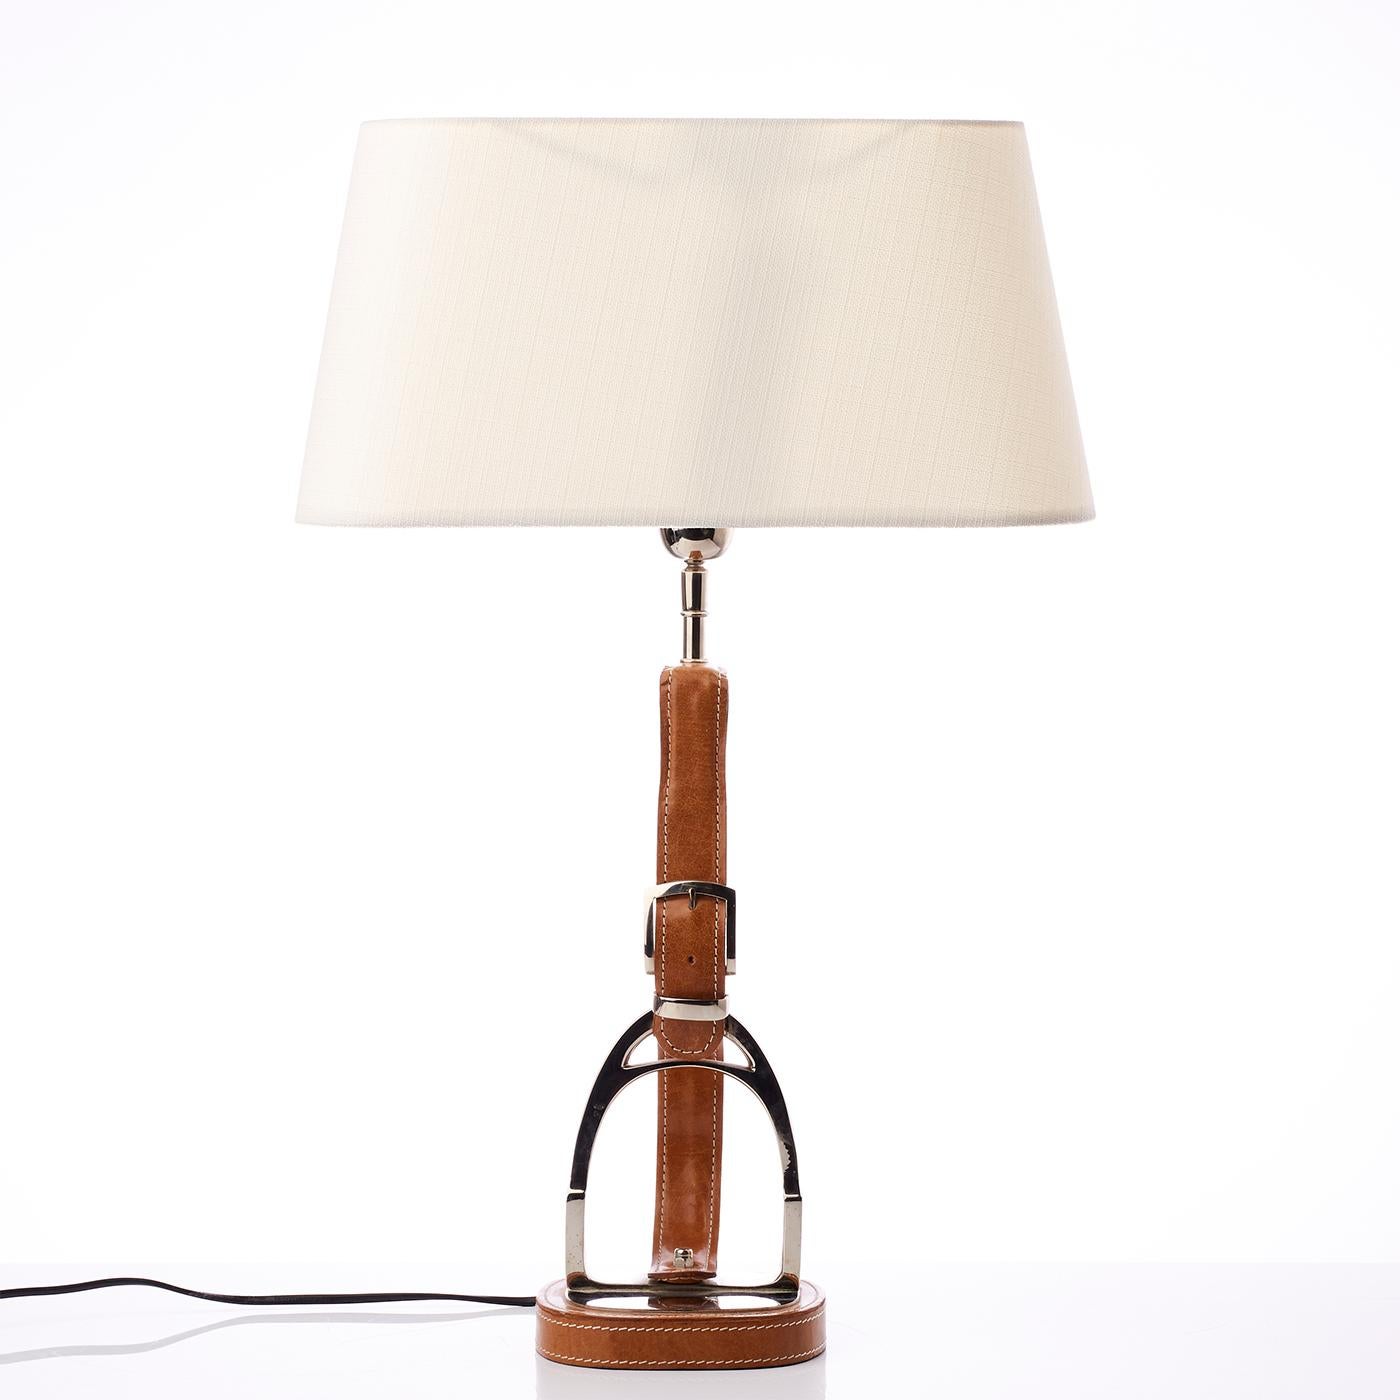 Table lamp in brown leather
with polished nickel finish stirrup.
1 bulb, lamp holder type E27, max 
40 watt, bulb not included.
